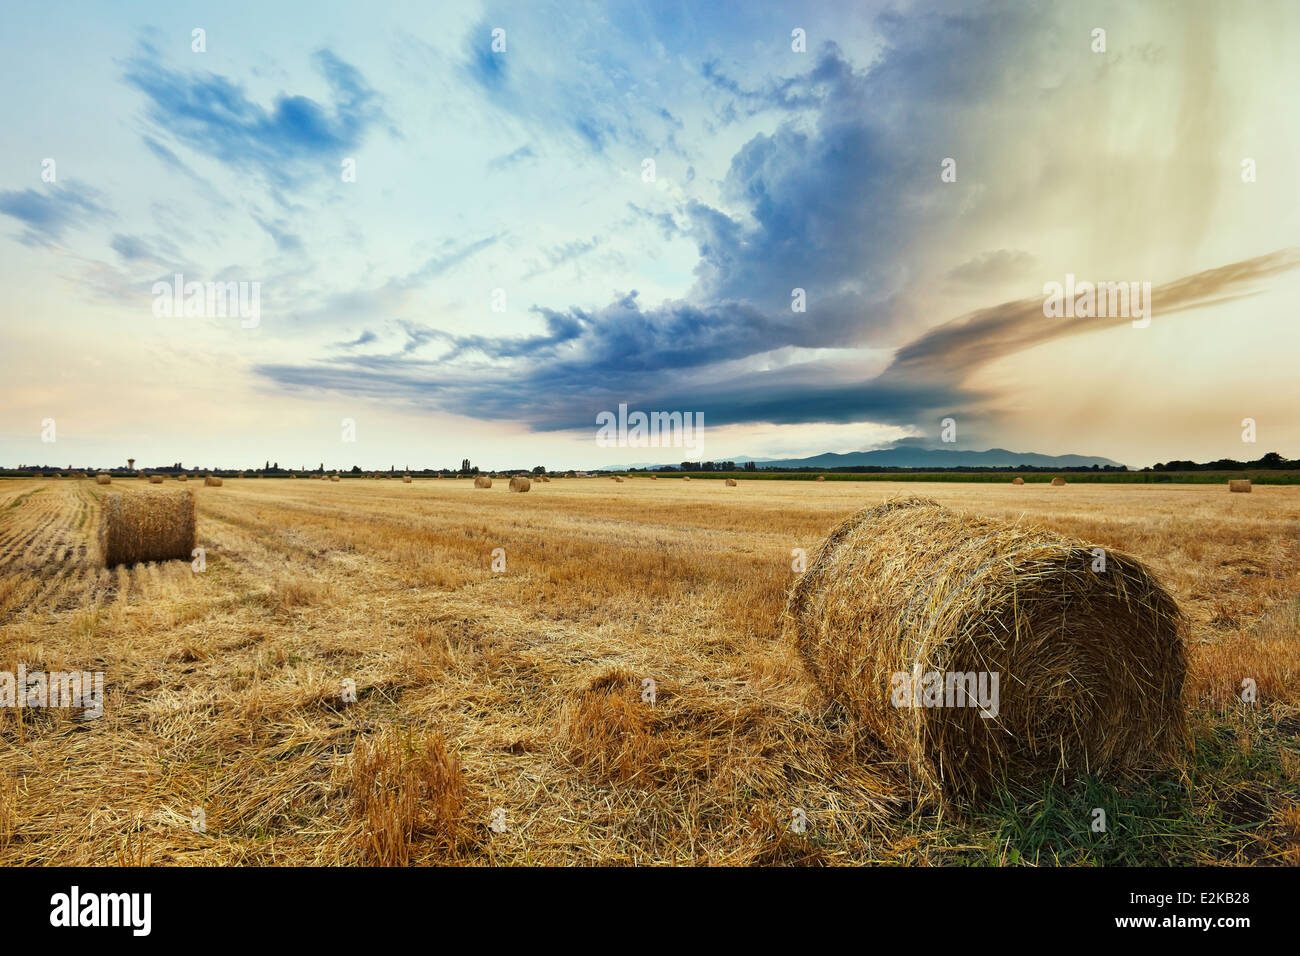 Rain clouds over cereal fields. Horbourg-Wihr, Haut-Rhin, Alsace, France. Stock Photo